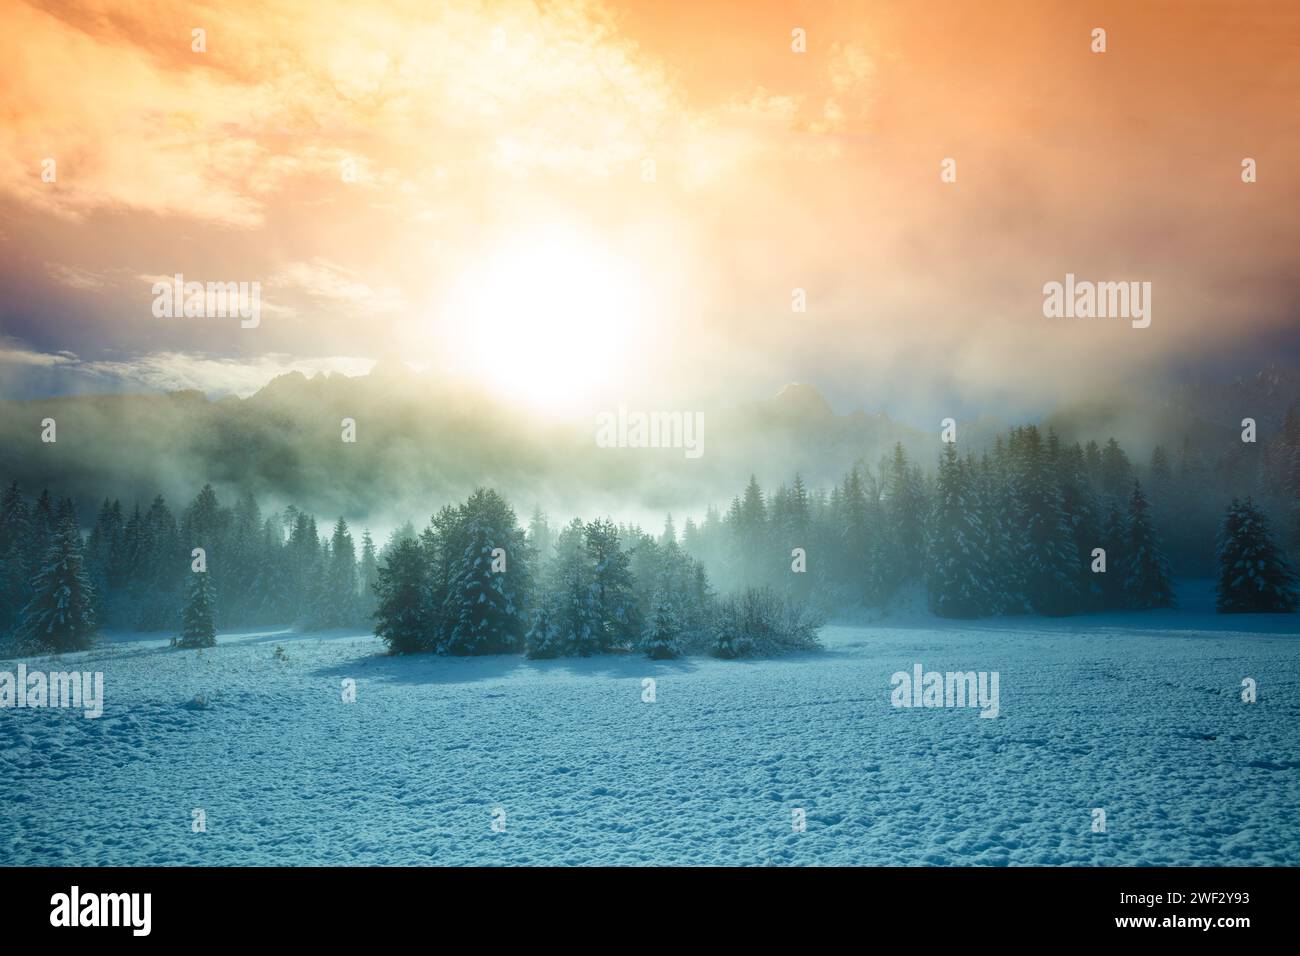 Snow-covered spruce trees on the mountainside during sunrise in winter. Winter rural landscape Stock Photo